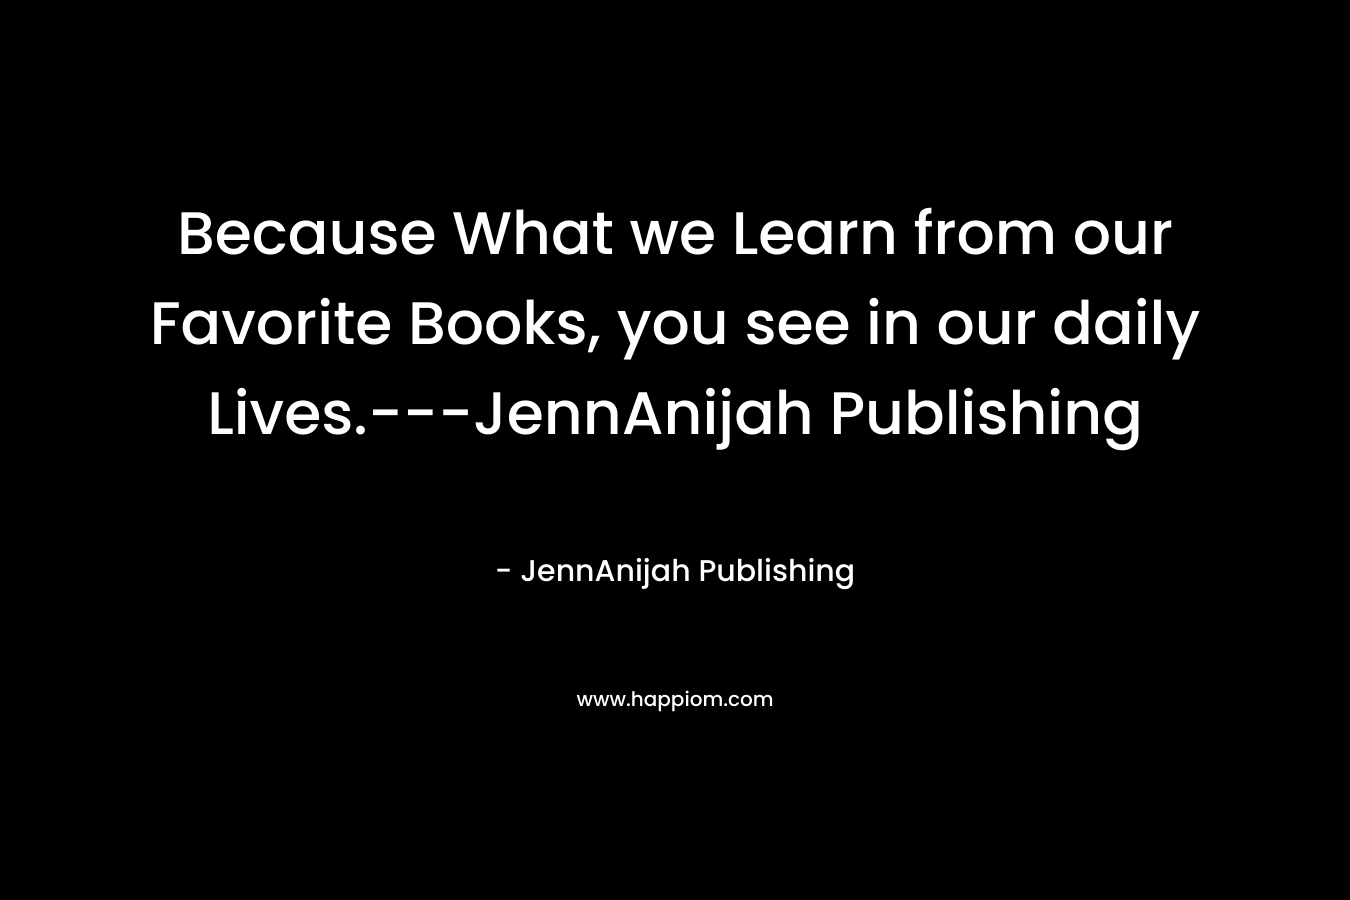 Because What we Learn from our Favorite Books, you see in our daily Lives.---JennAnijah Publishing